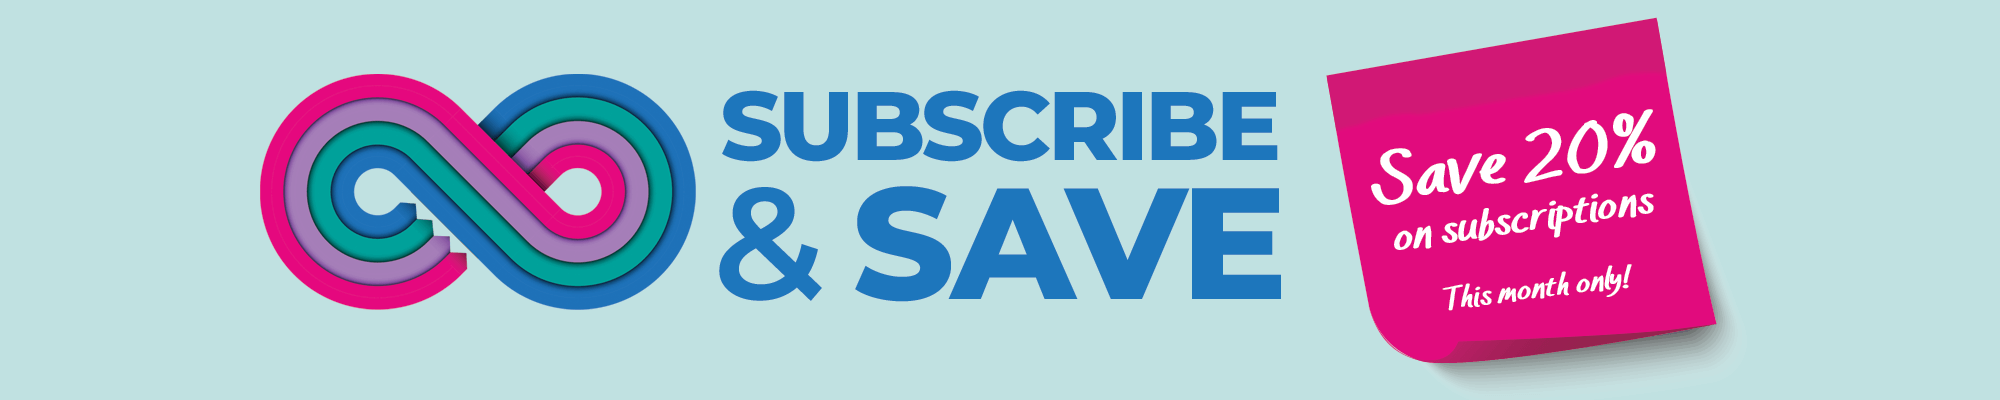 Subscribe & Save - Save 20% on new subscriptions this month only